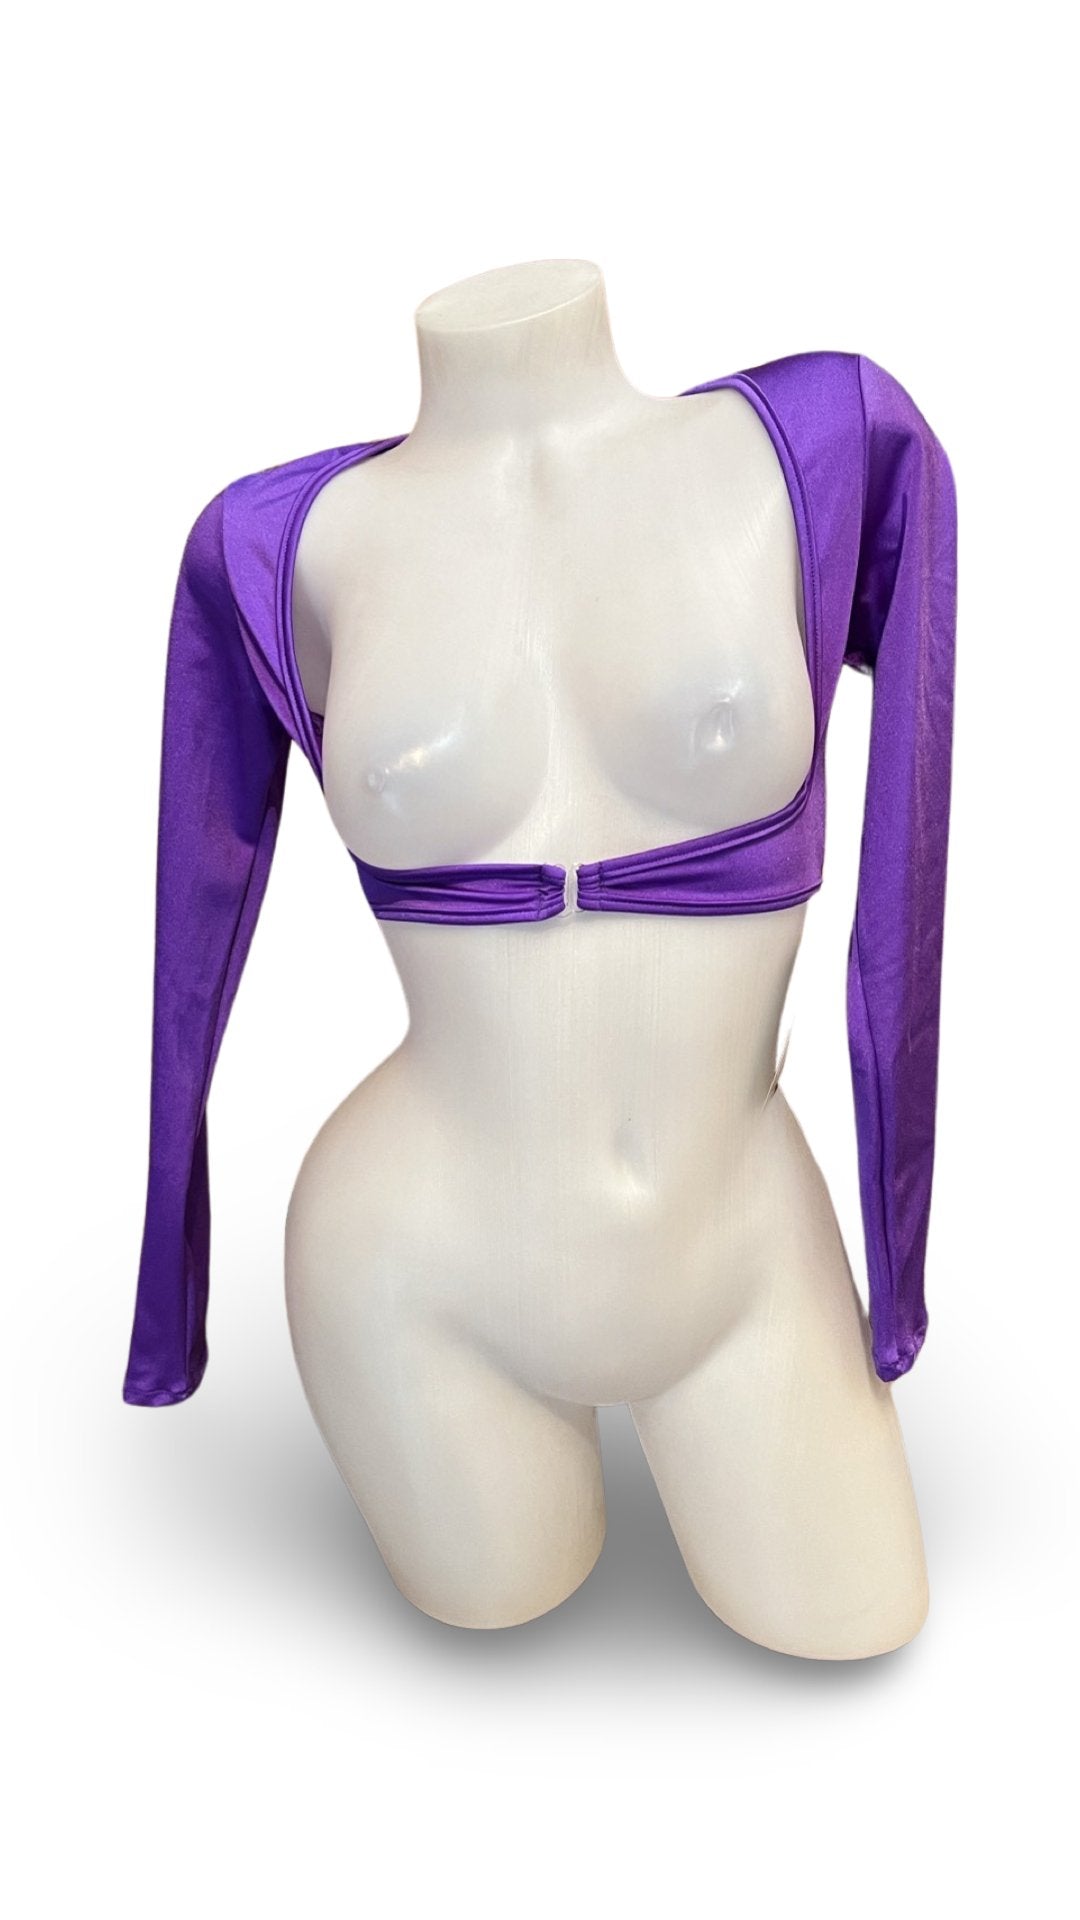 Sleeved Clip Crop Top Purple - Model Express VancouverClothing